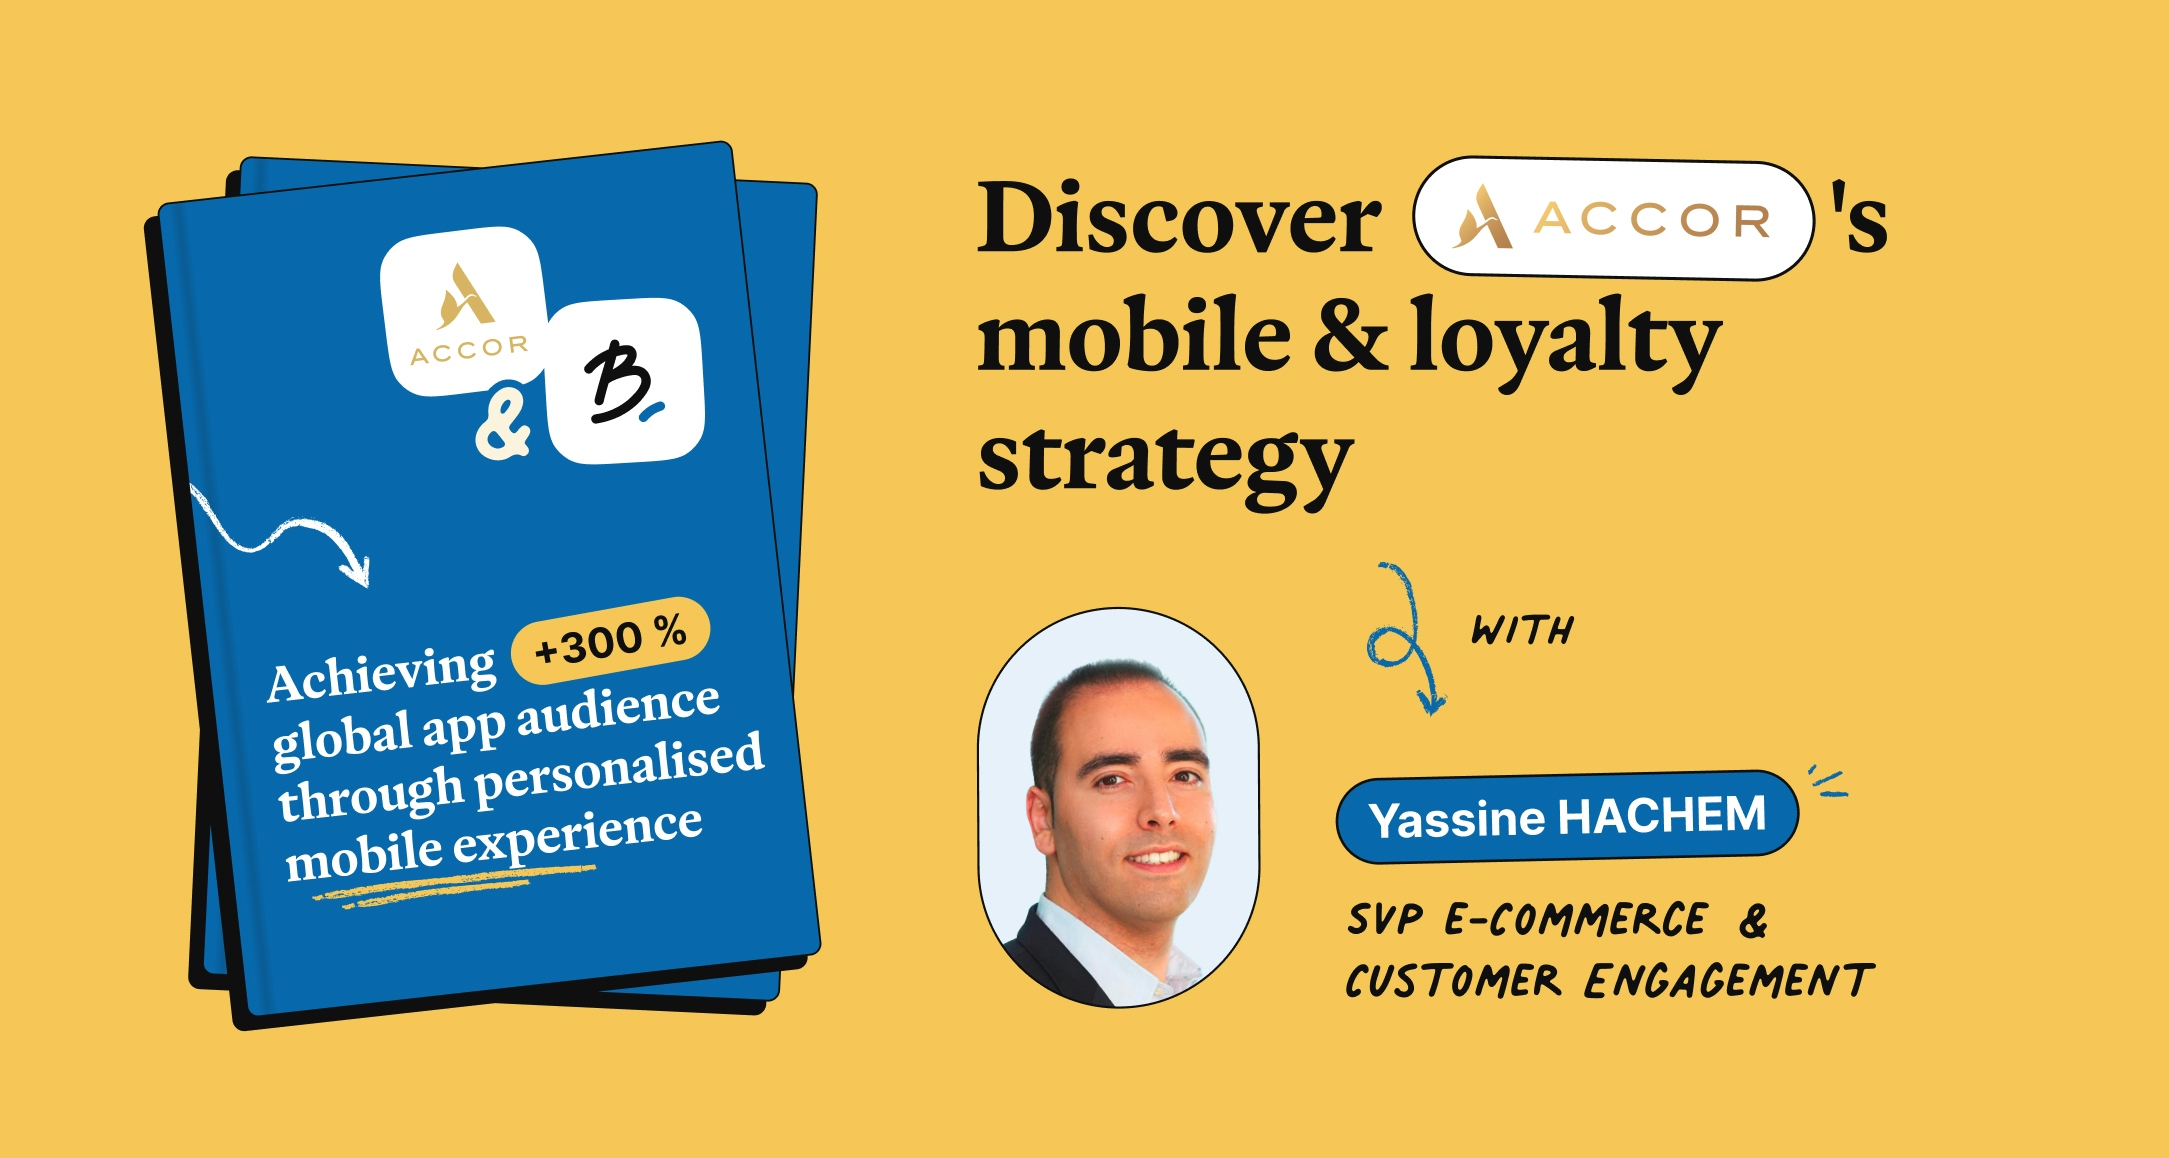 Accor: Achieving +300% App Audience Growth Through Personalized Mobile Experiences